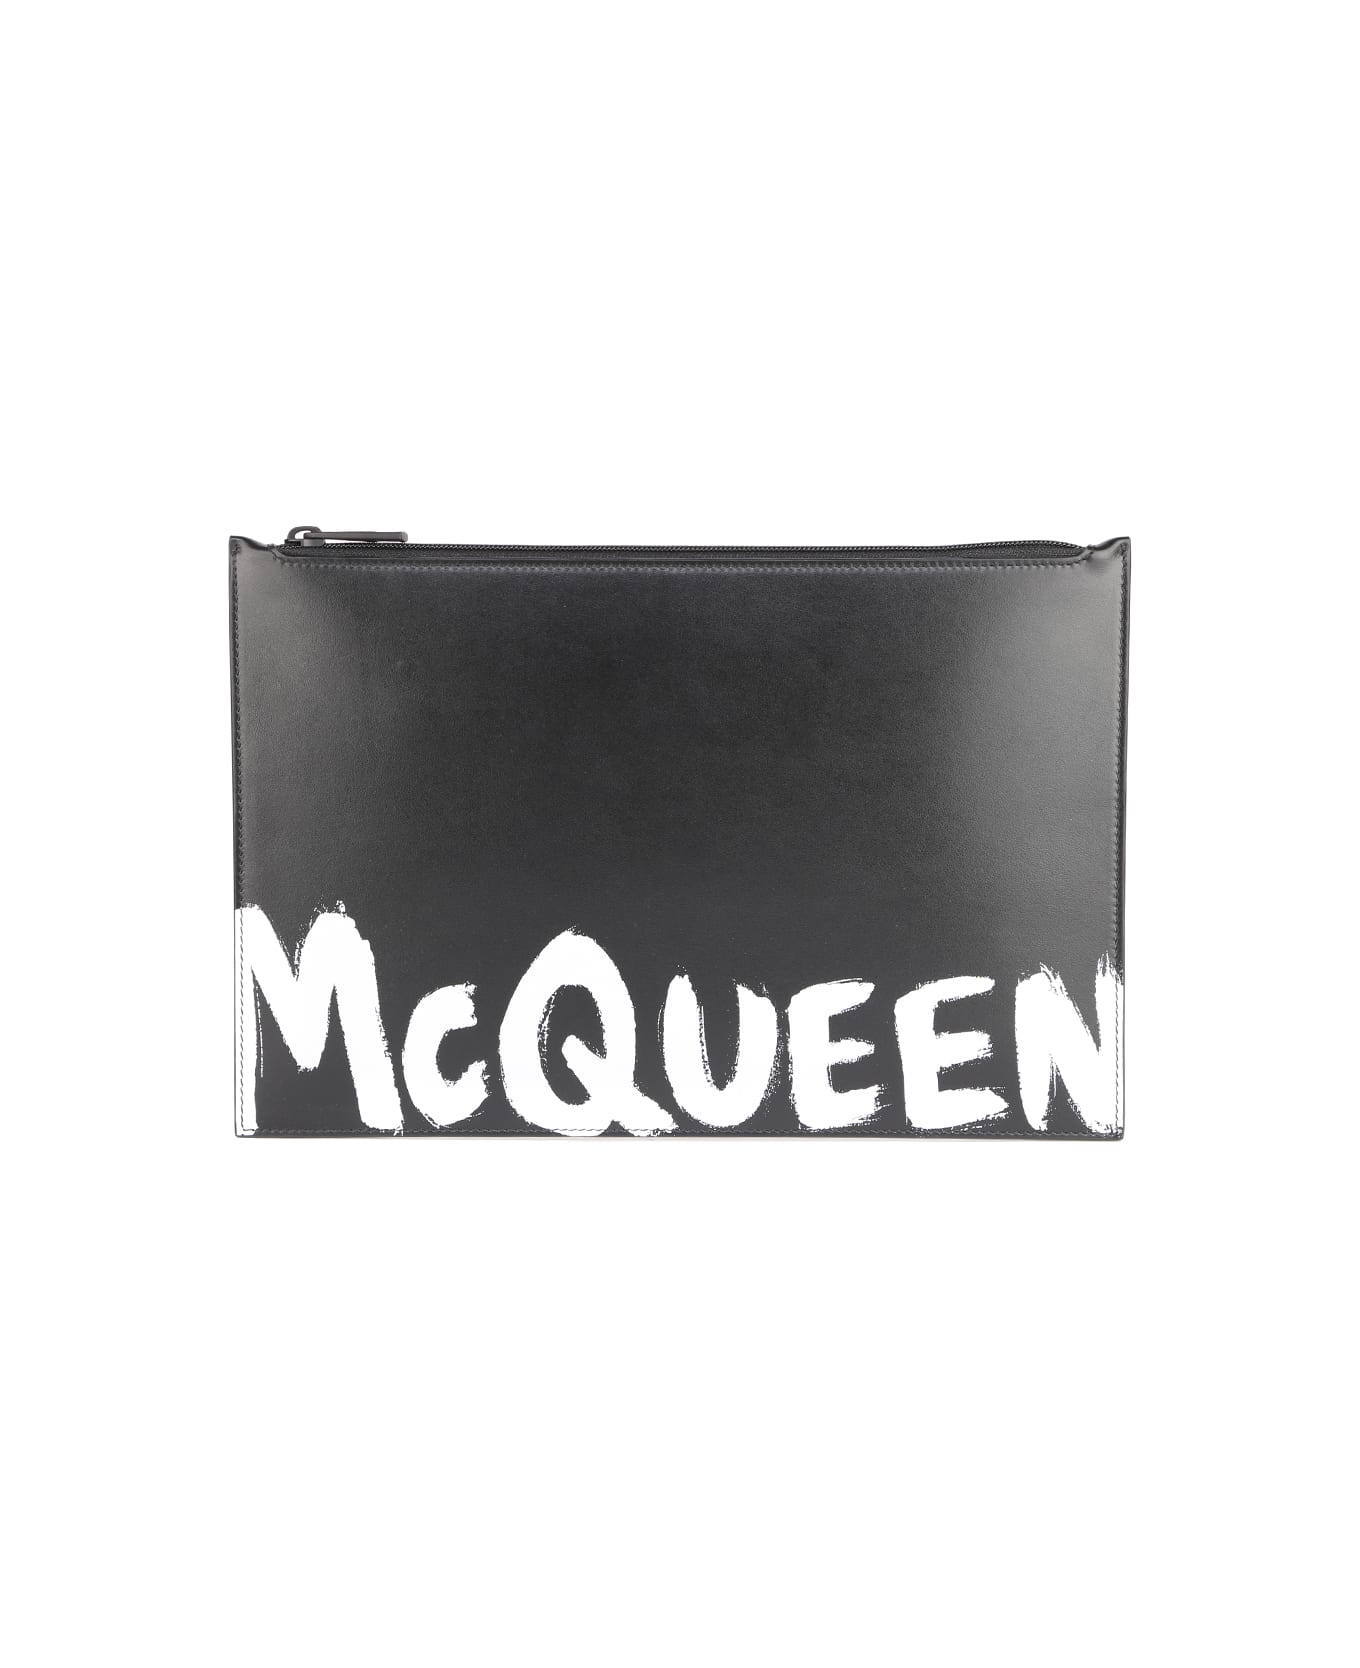 Alexander McQueen Leather Clutch Bag With Contrasting Logo - Black/white